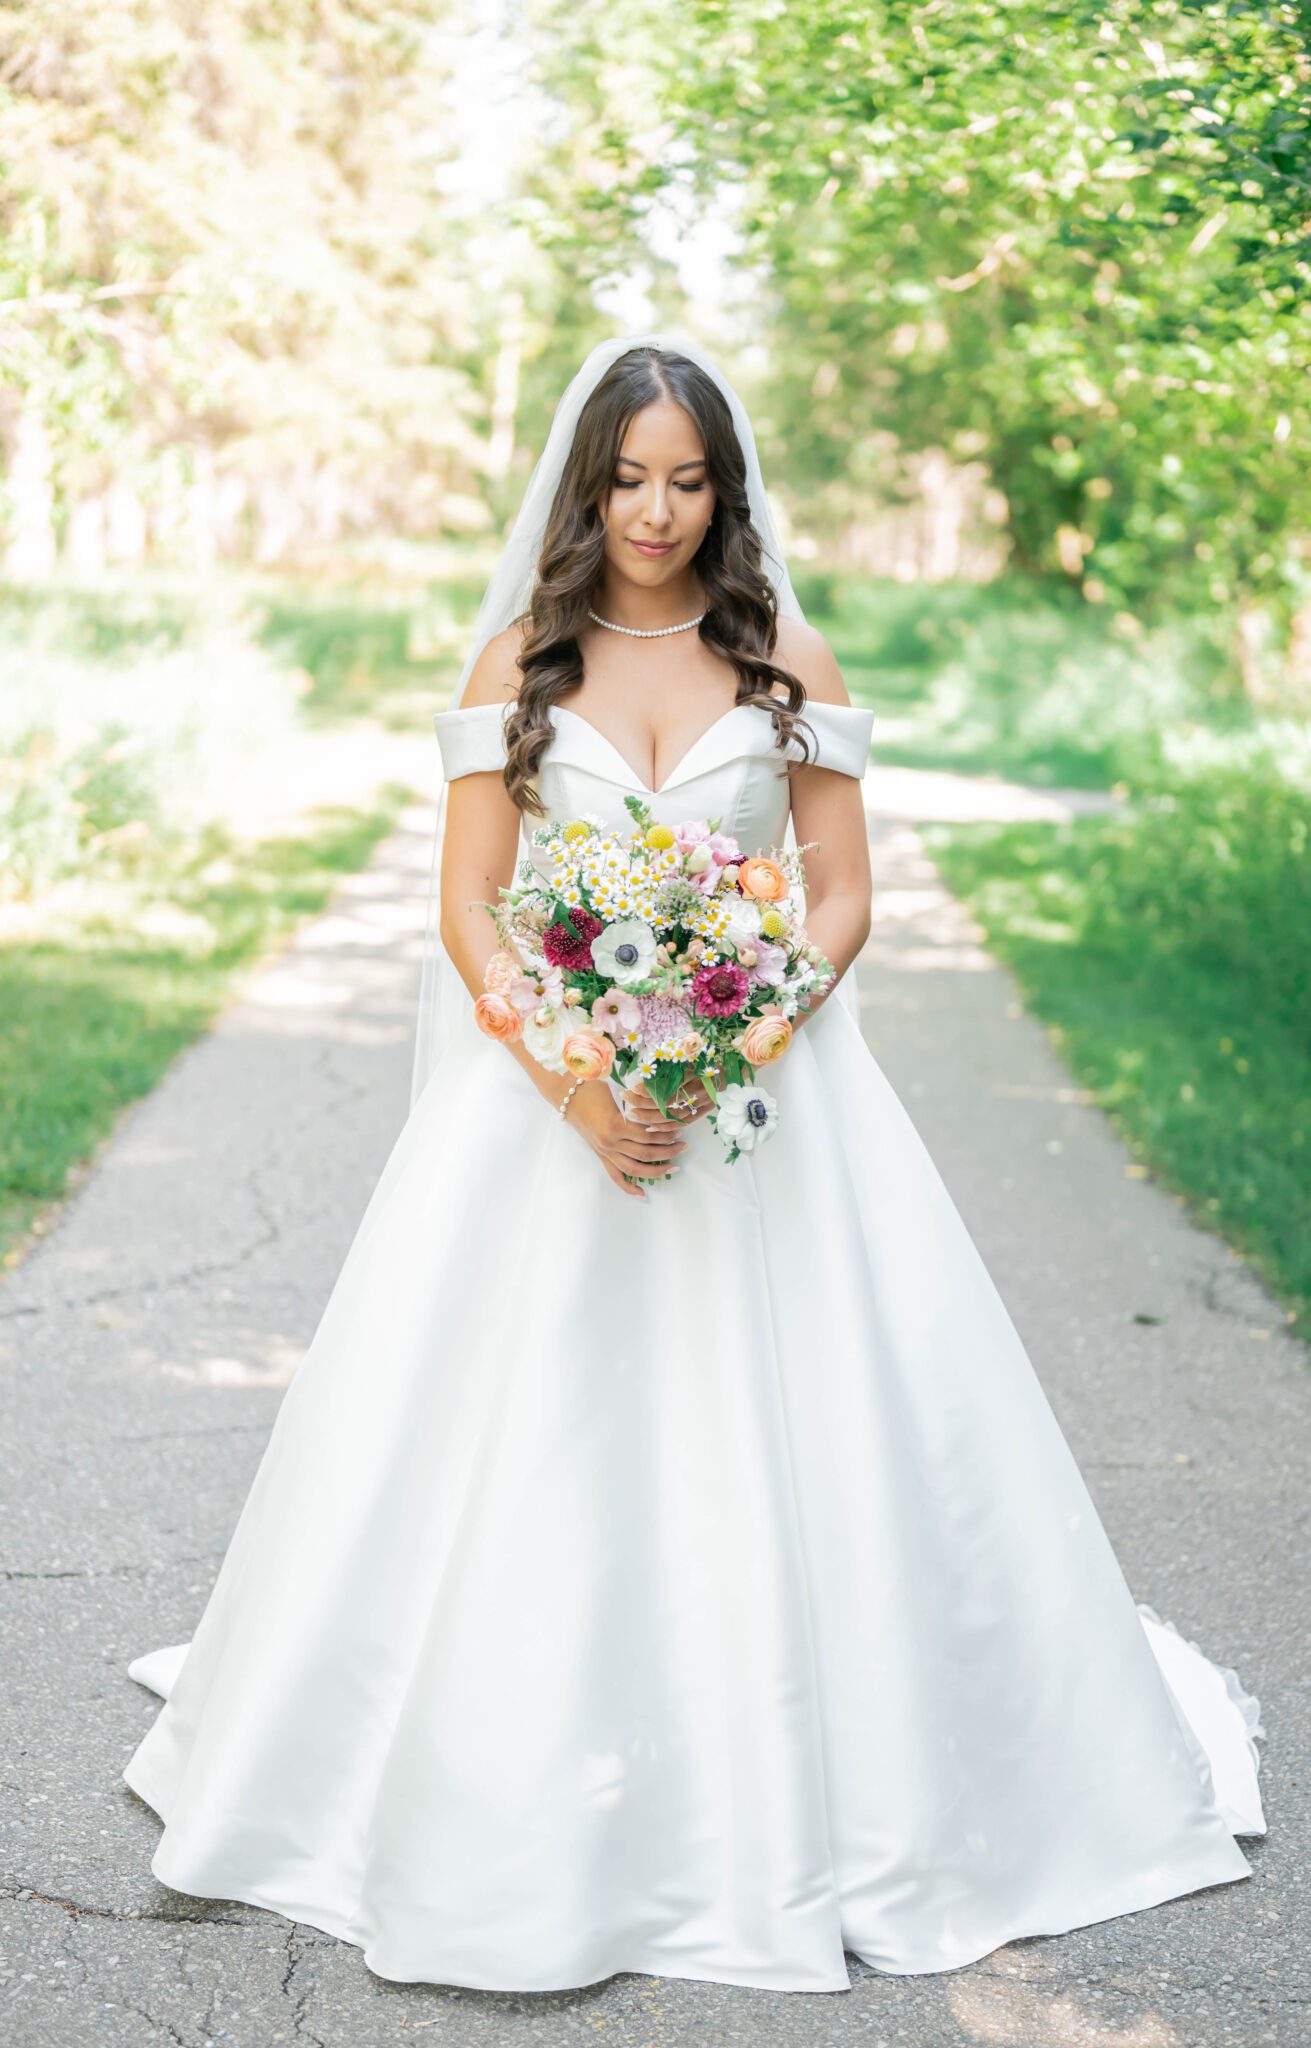 Portrait of bride's outfit details and wildflower bridal bouquet, featuring elegant bridal gown with off the shoulder sleeves and a sweetheart neckline, whimsical garden wedding in Spruce Meadows.